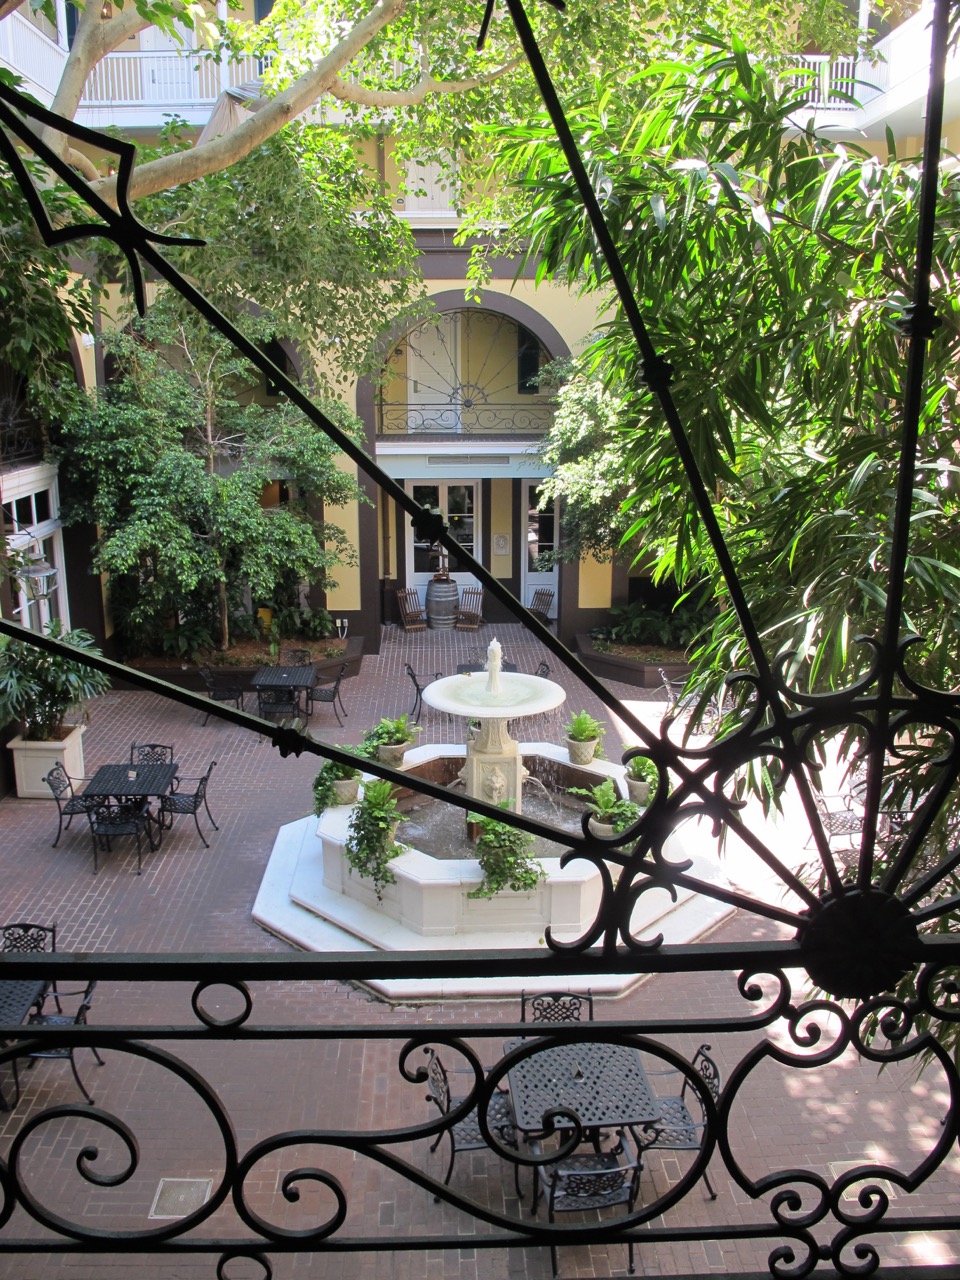 Romantic courtyard at the Hotel Mazarin. Photo by Marla Norman.